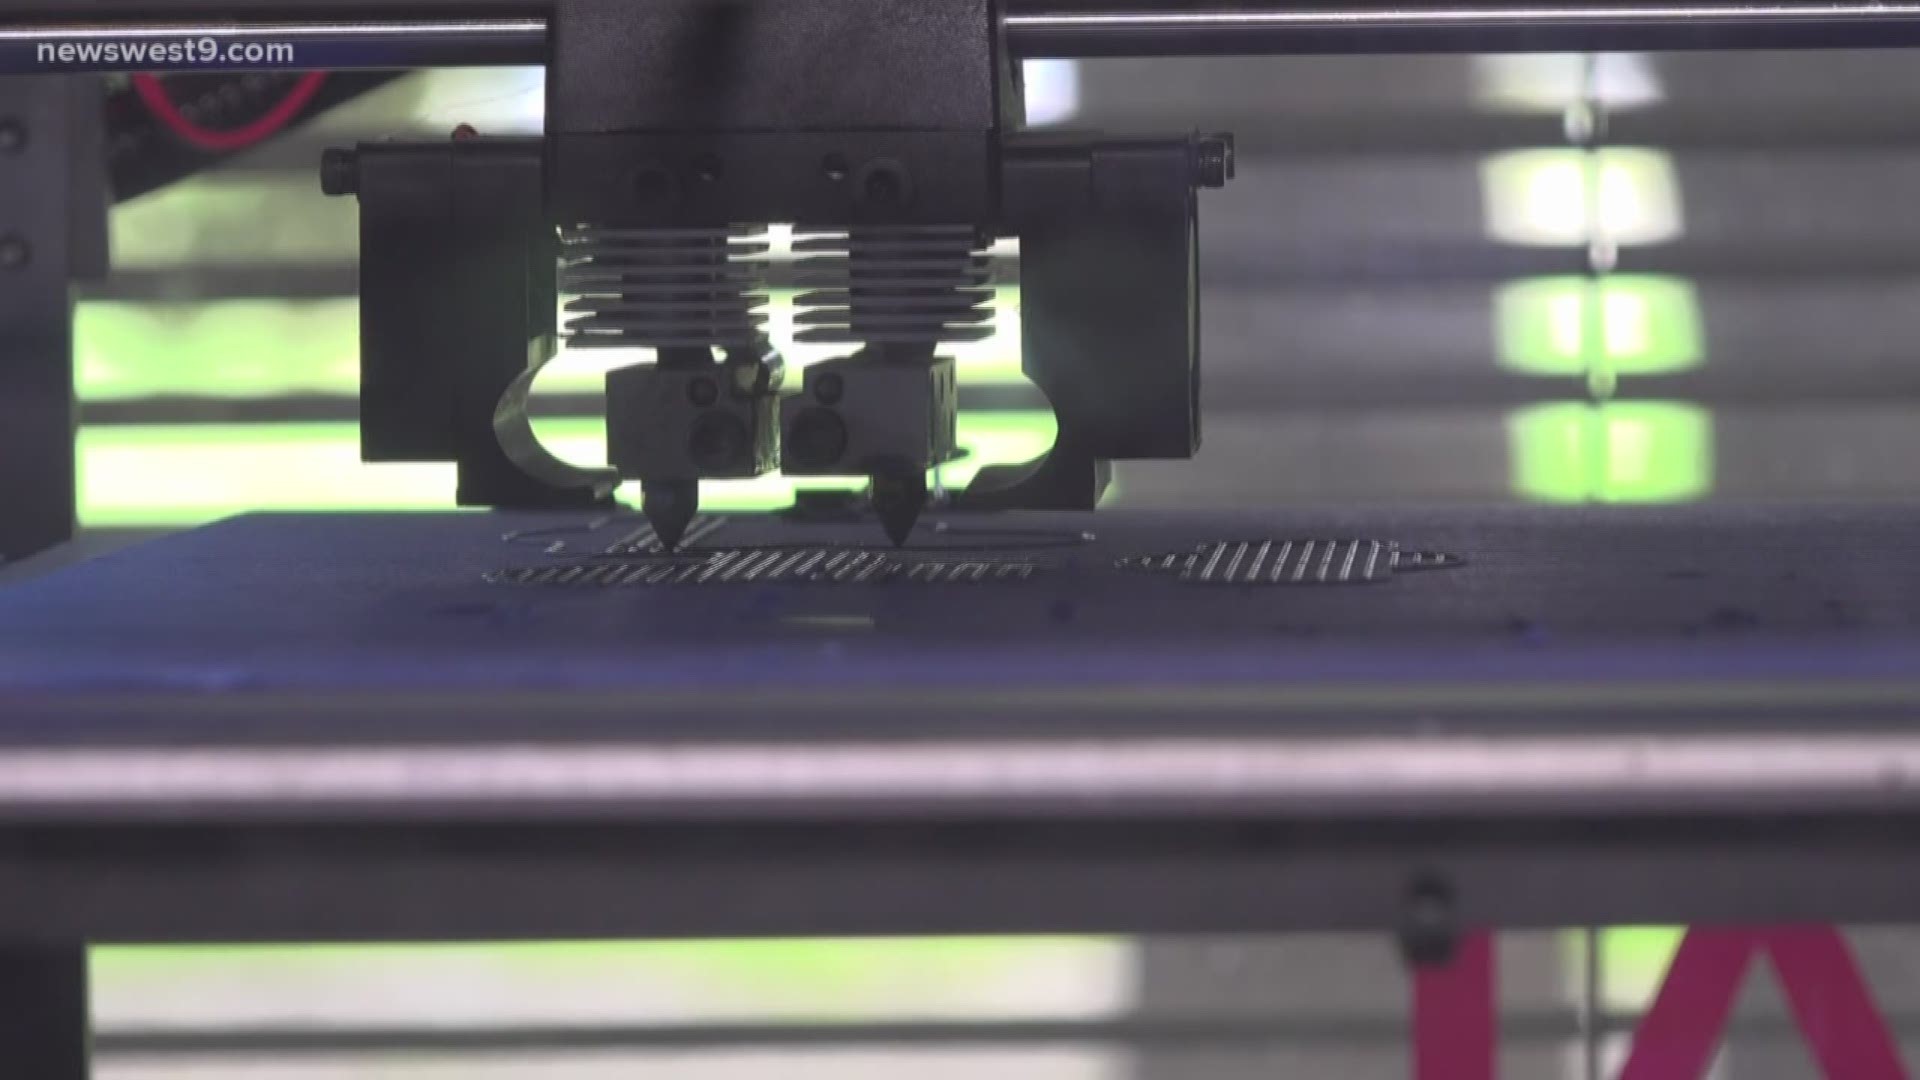 The Museum of the Southwest is using their 3-D printer to make ventilators